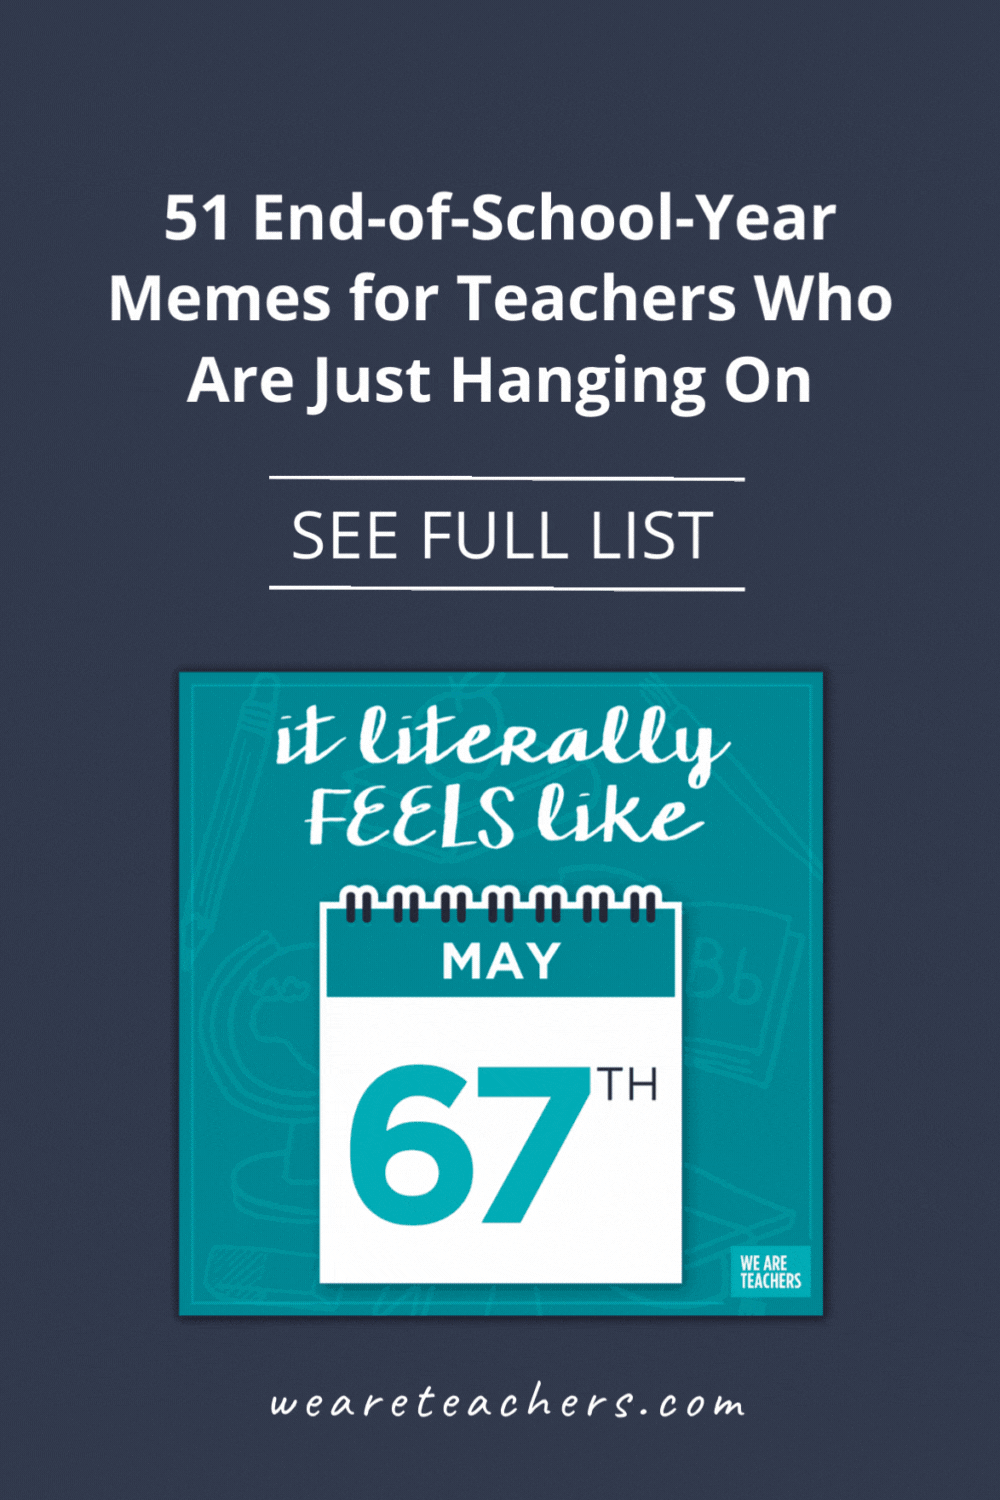 You're in the homestretch! These end-of-school-year memes for teachers will make you laugh and help ease you into summer!